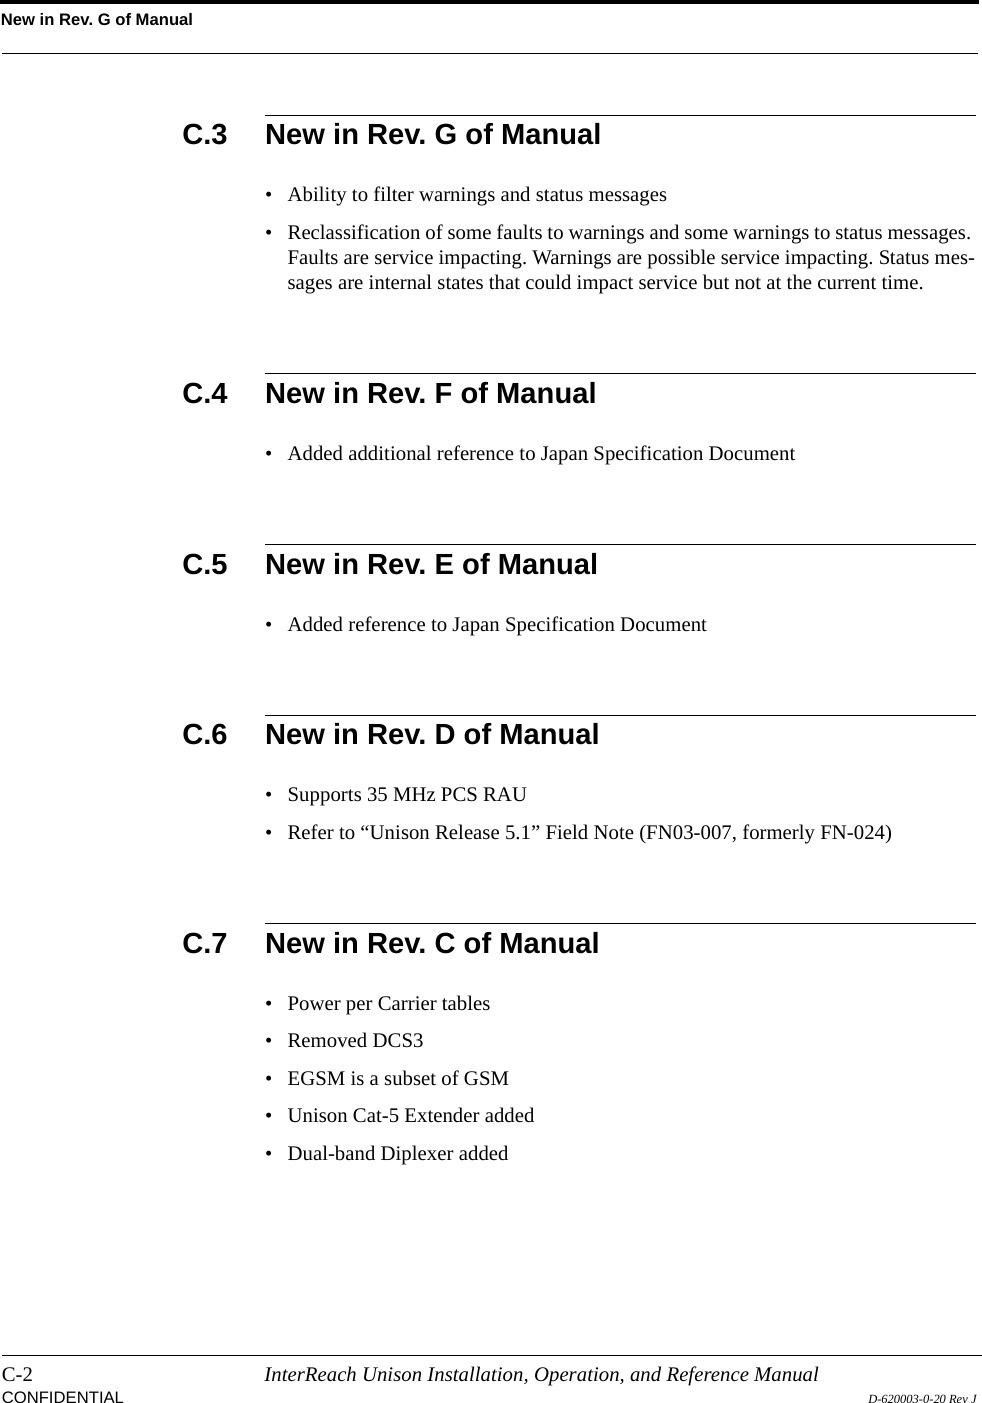 New in Rev. G of ManualC-2 InterReach Unison Installation, Operation, and Reference ManualCONFIDENTIAL D-620003-0-20 Rev JC.3 New in Rev. G of Manual• Ability to filter warnings and status messages• Reclassification of some faults to warnings and some warnings to status messages. Faults are service impacting. Warnings are possible service impacting. Status mes-sages are internal states that could impact service but not at the current time.C.4 New in Rev. F of Manual• Added additional reference to Japan Specification DocumentC.5 New in Rev. E of Manual• Added reference to Japan Specification DocumentC.6 New in Rev. D of Manual• Supports 35 MHz PCS RAU• Refer to “Unison Release 5.1” Field Note (FN03-007, formerly FN-024)C.7 New in Rev. C of Manual• Power per Carrier tables• Removed DCS3• EGSM is a subset of GSM• Unison Cat-5 Extender added• Dual-band Diplexer added